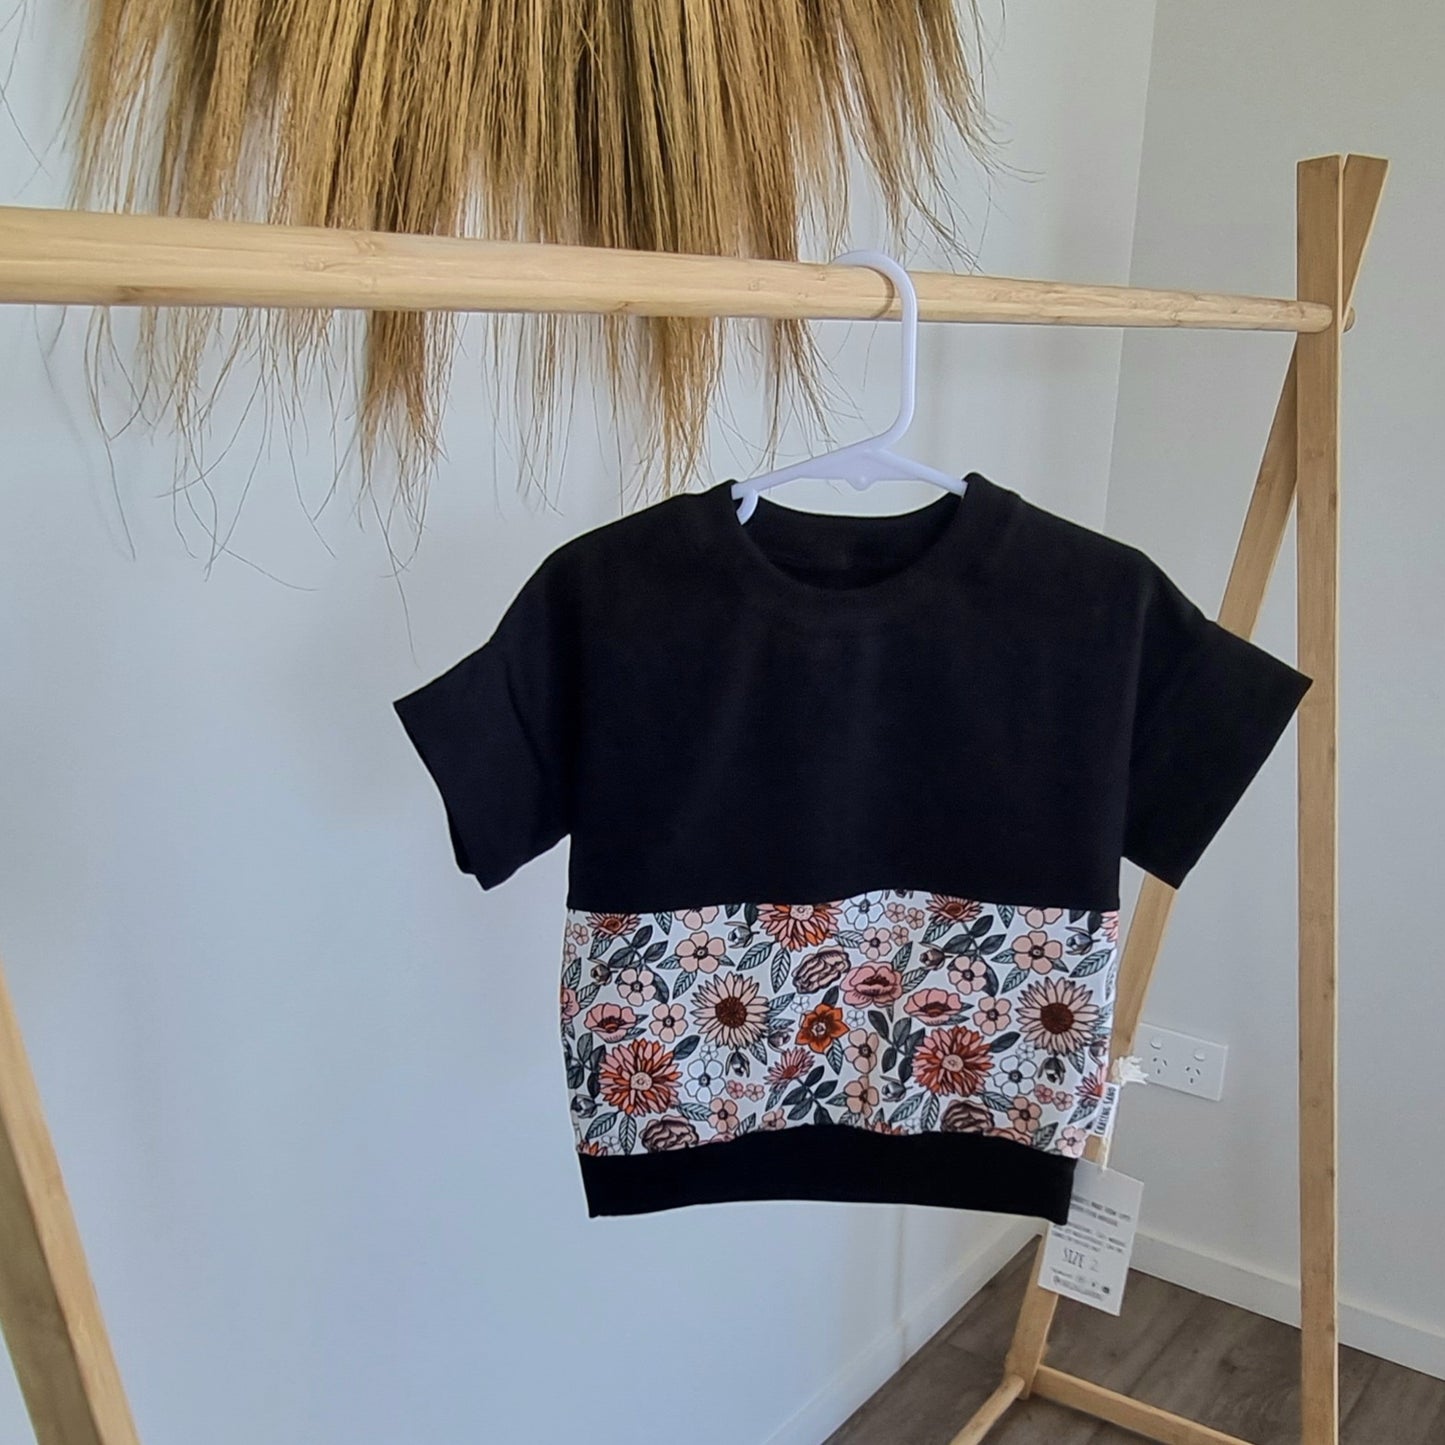 Tee - Florent hanging on wooden rack. Black t-shirt with pattern around the middle: Orange and peach flowers with green leaves on white background.